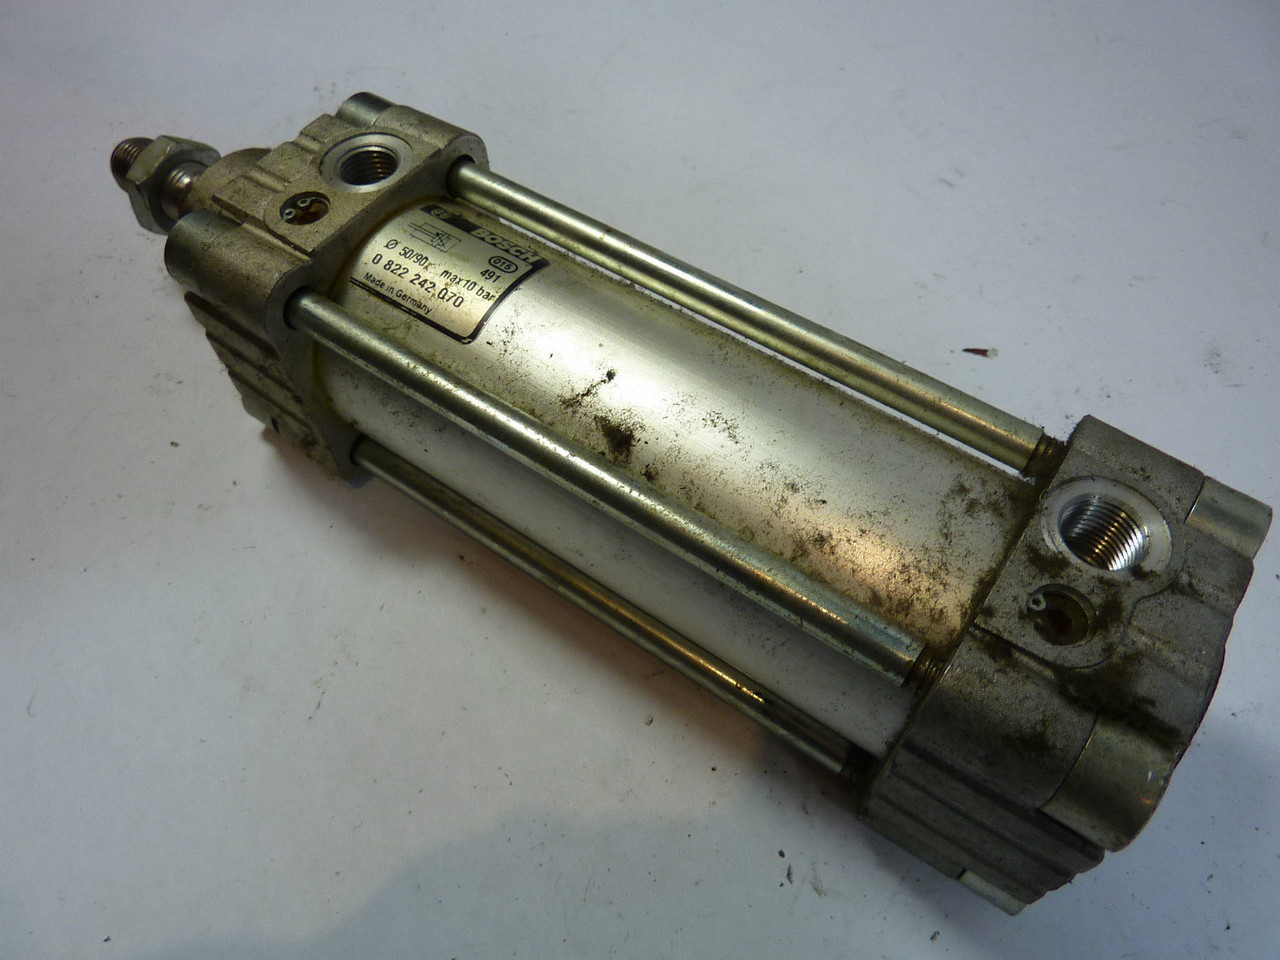 Bosch 0-822-242-070 Pneumatic Cylinder Actuator USED